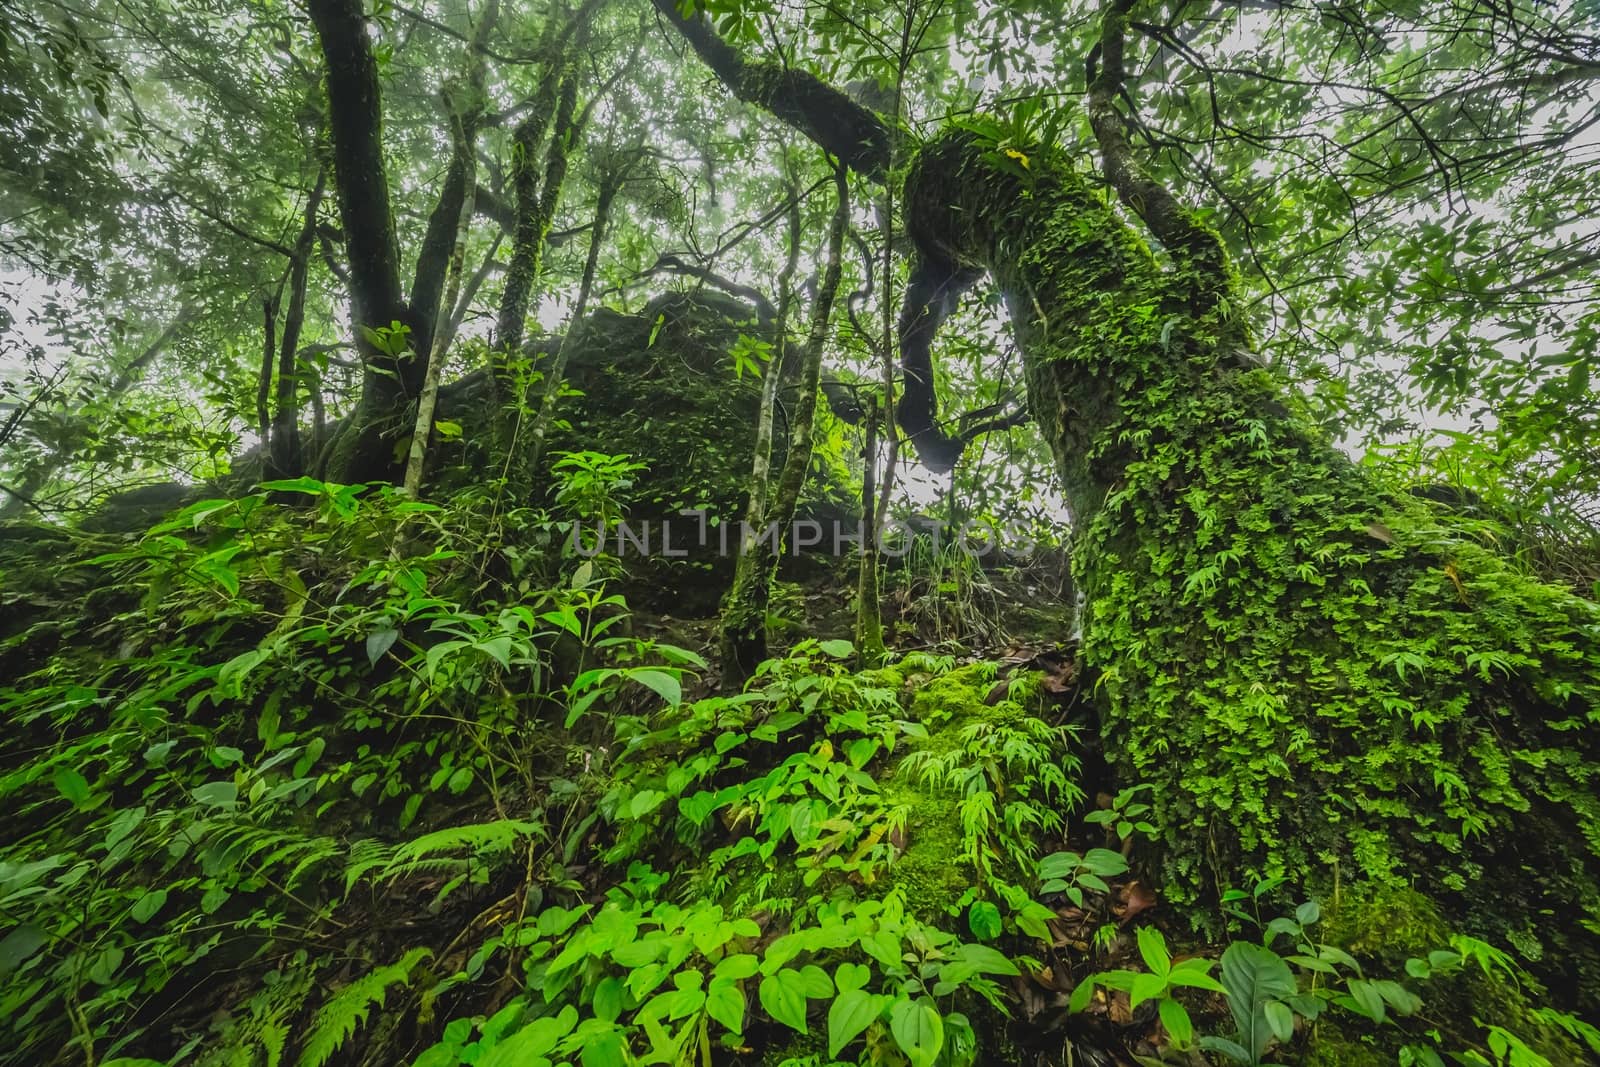 Large tree and ferns in lush tropical jungle